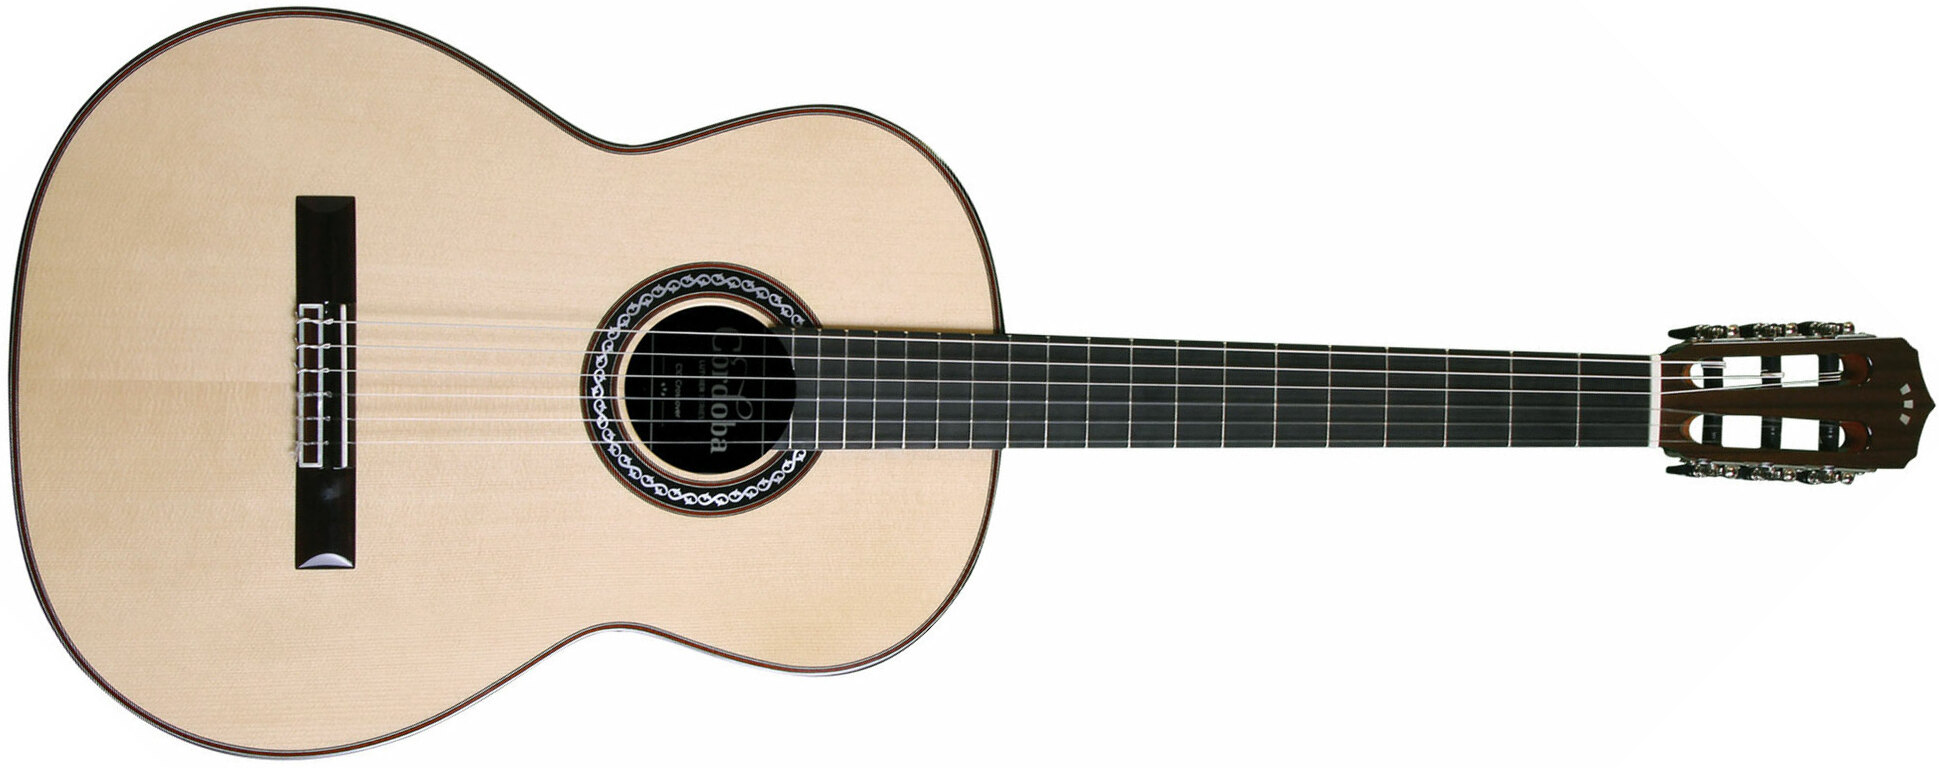 Cordoba C10 Crossover Sp Luthier Epicea Palissandre Eb - Natural - Classical guitar 4/4 size - Main picture